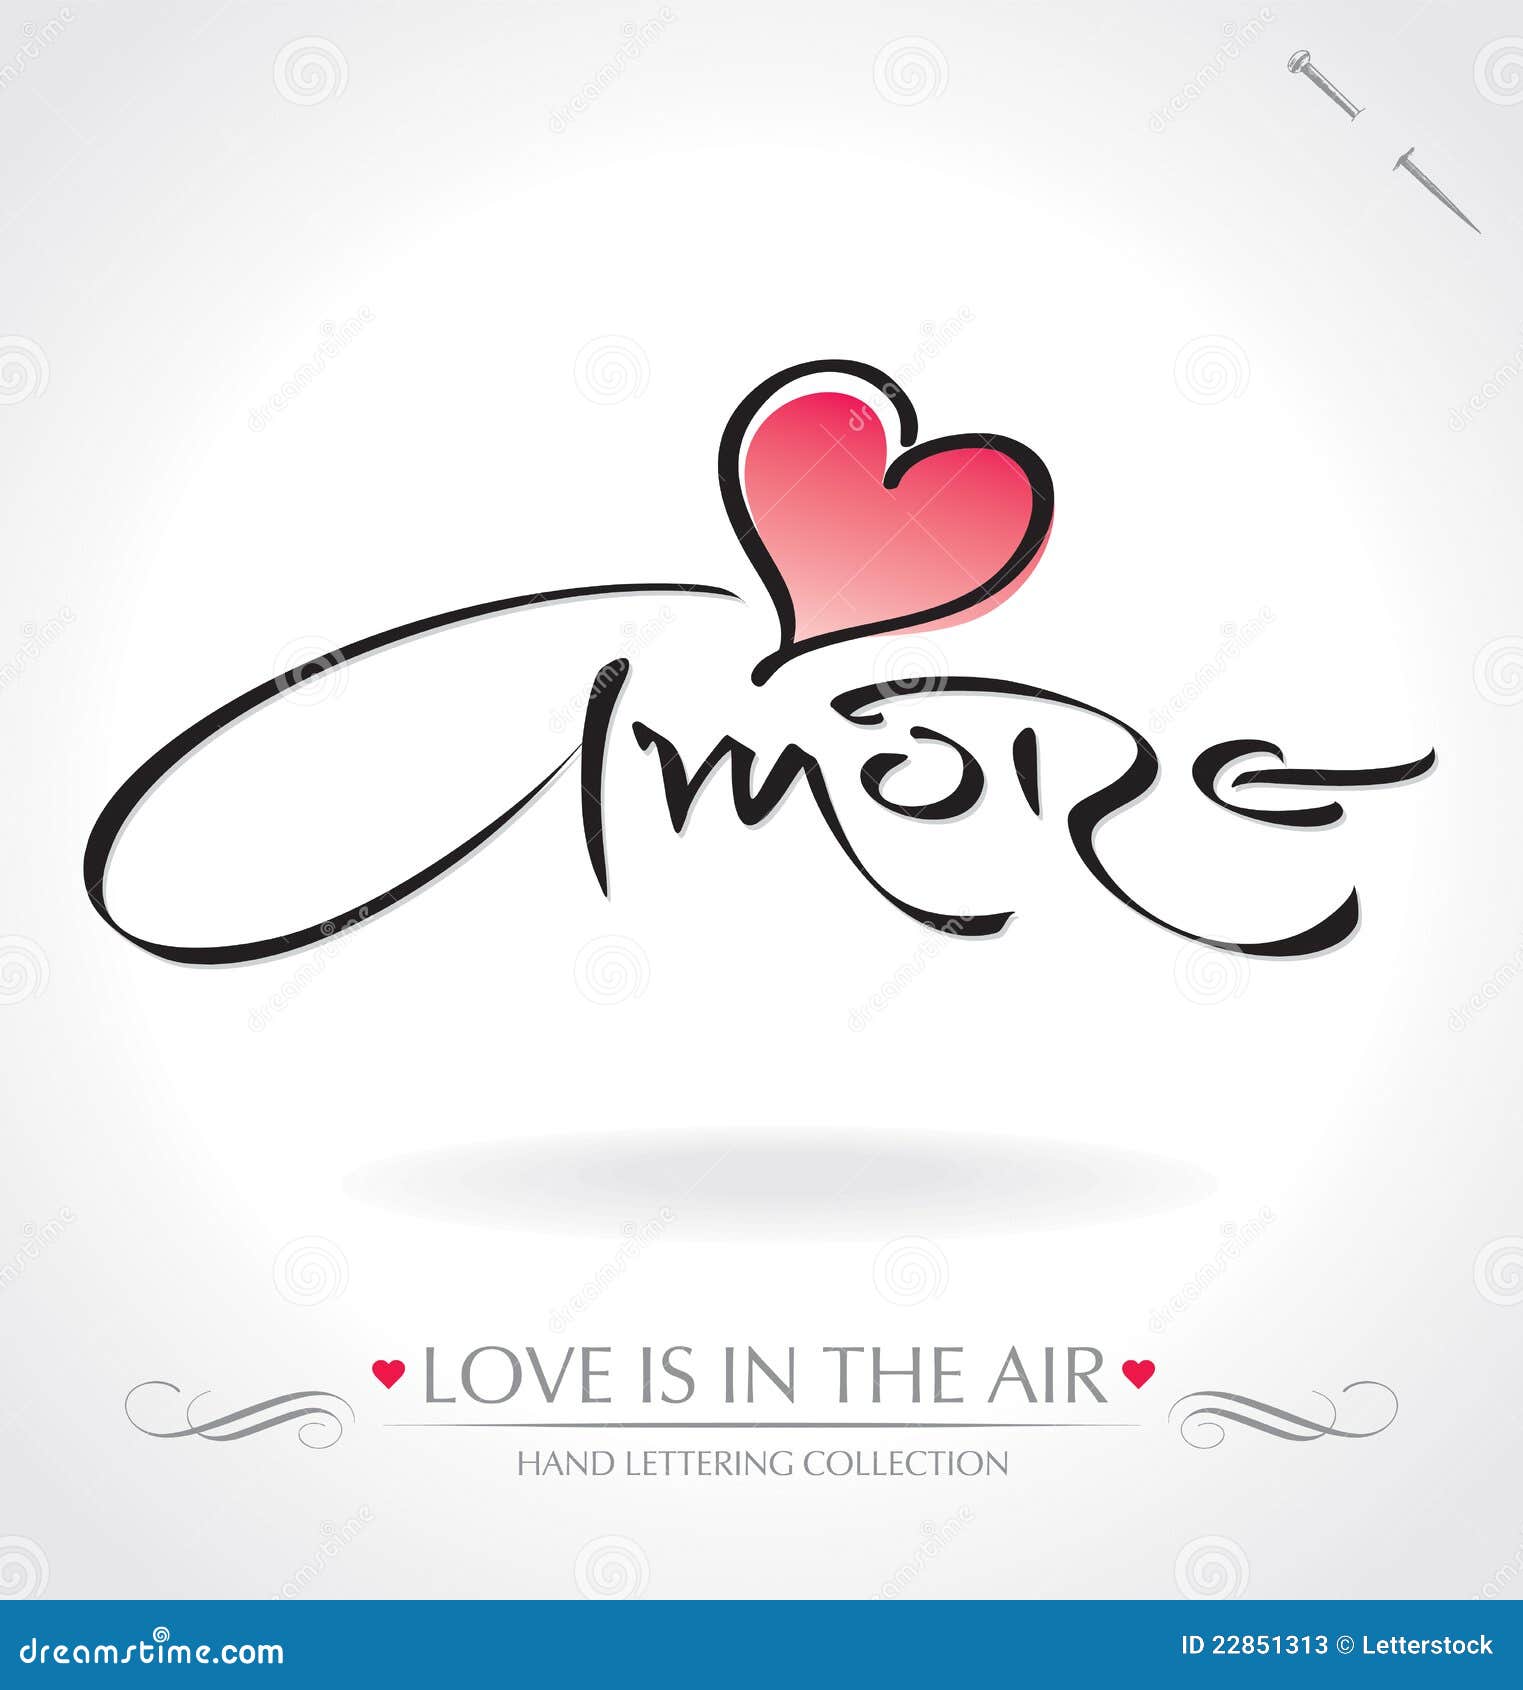 amore hand lettering ()